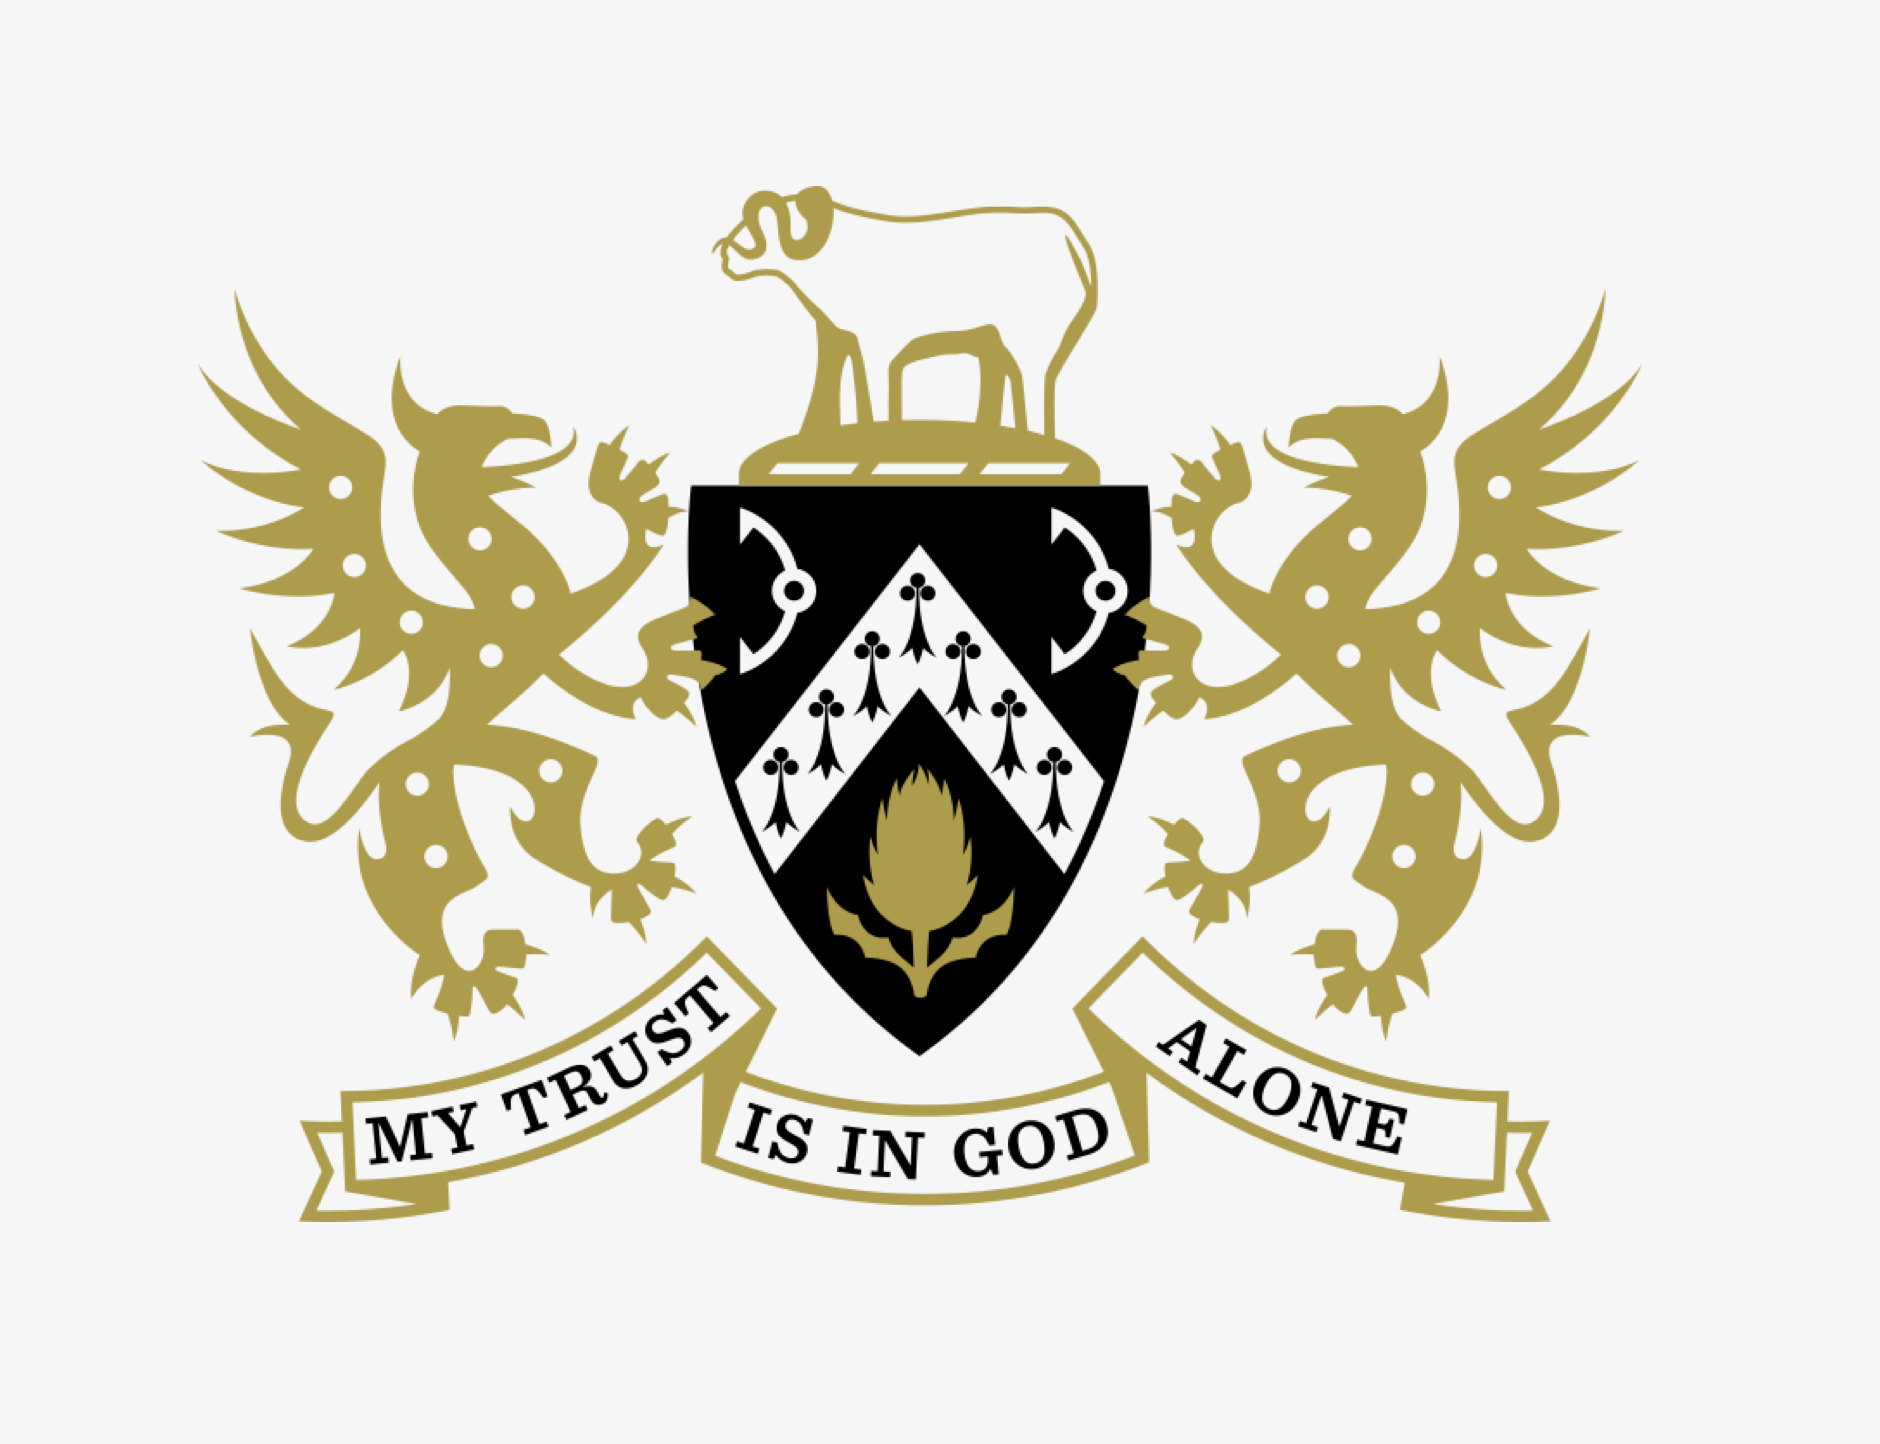 The new coat of arms complete with motto.